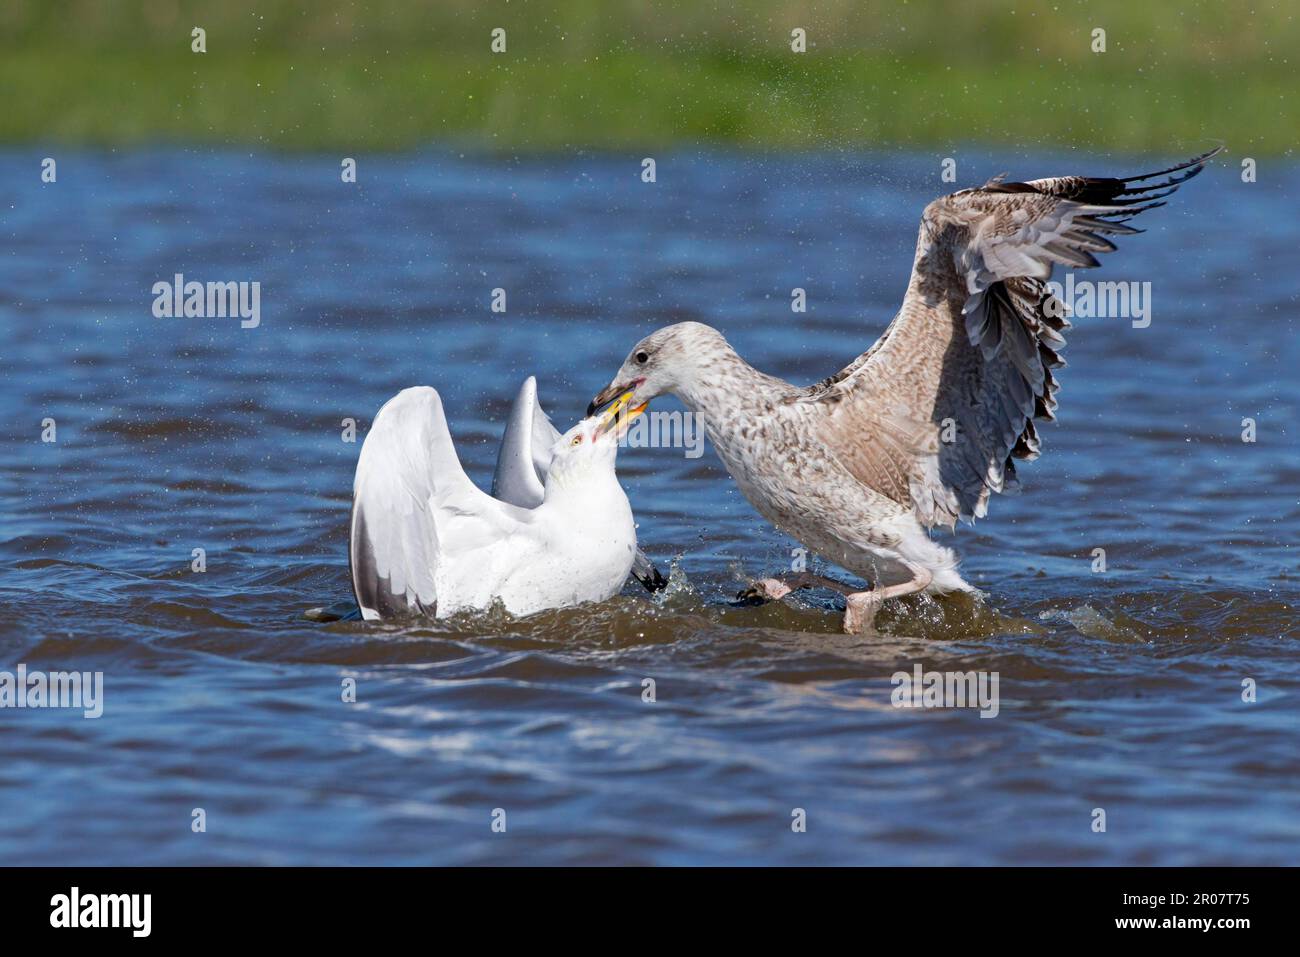 Adult great black-backed gull (Larus argentatus) (Larus marinus), breeding feather, and immature Herring Gull struggling on the water, Suffolk Stock Photo